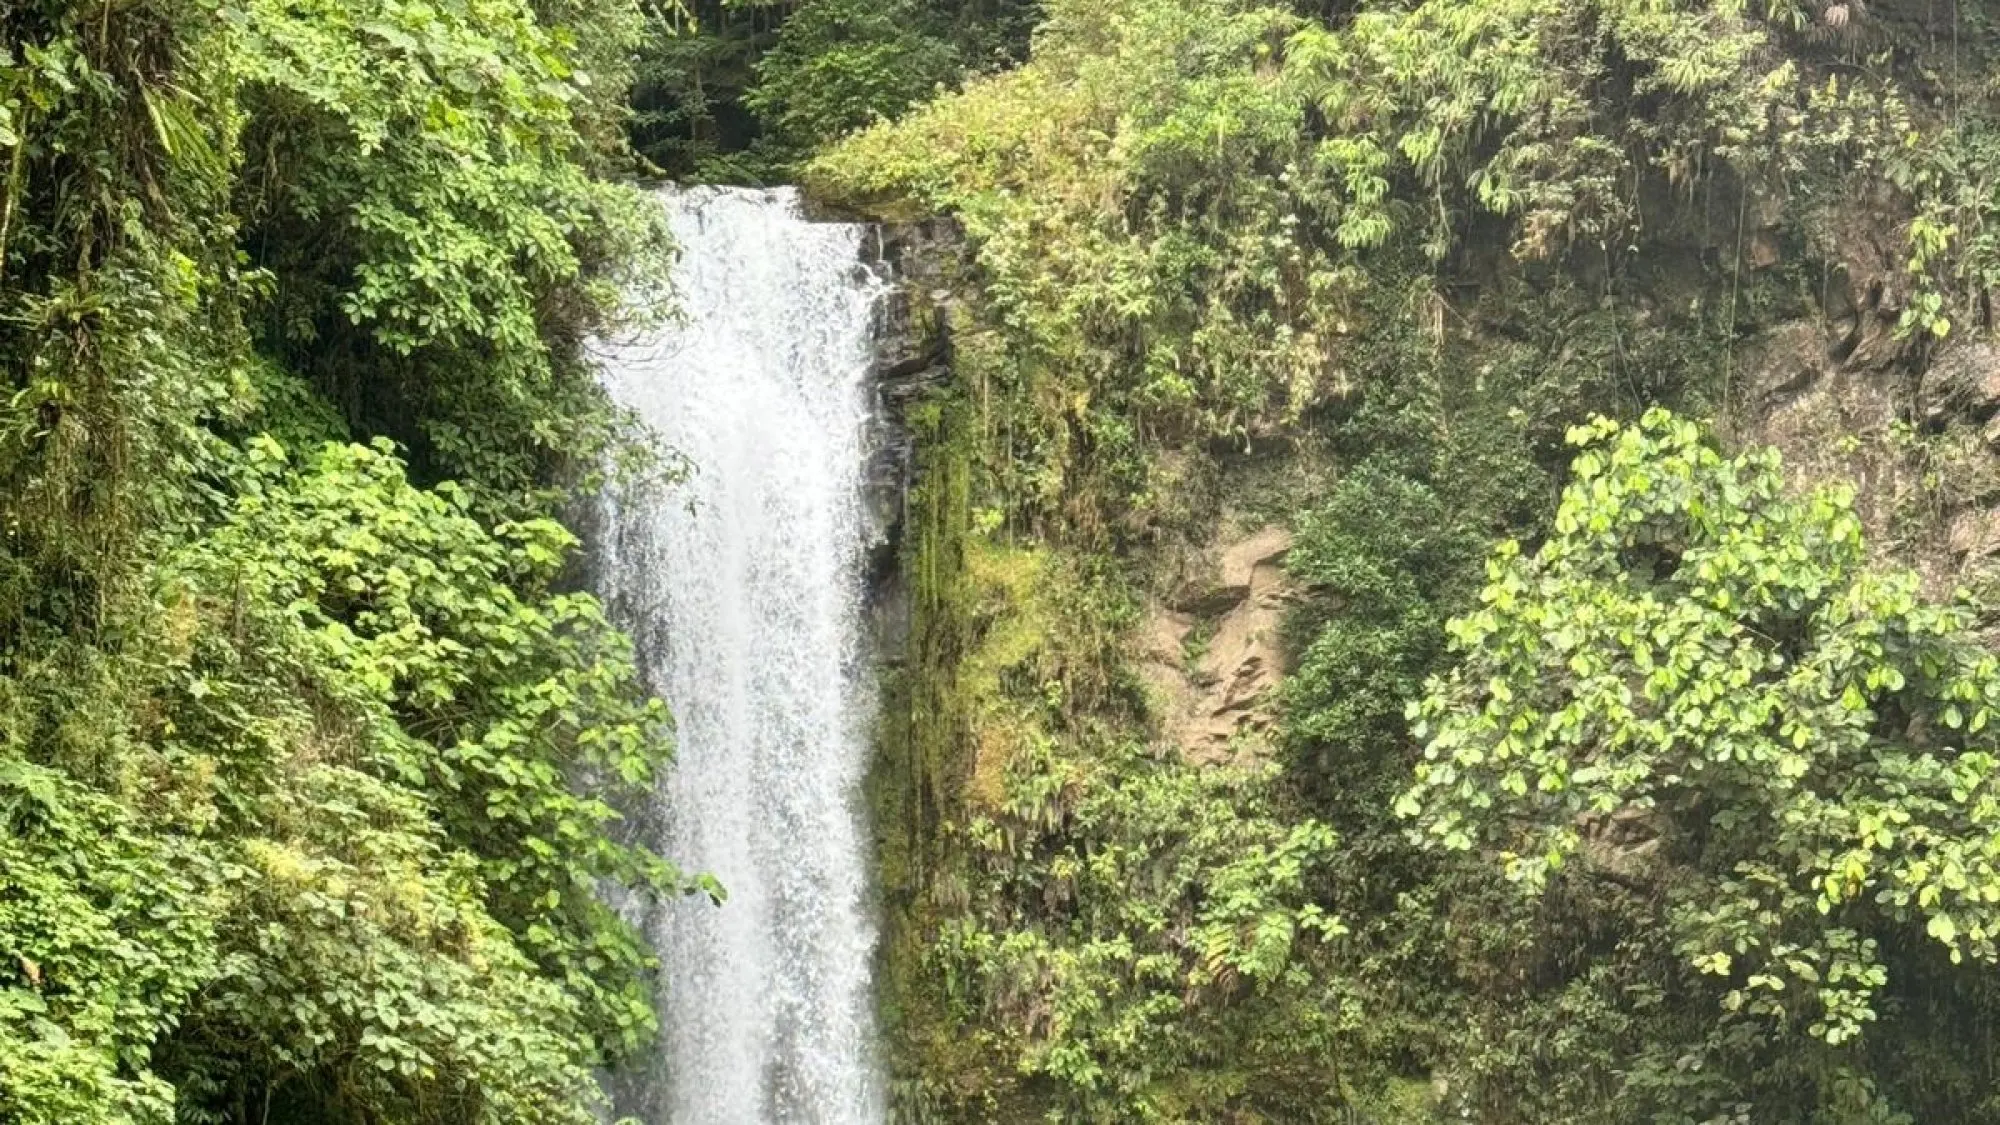 A waterfall surrounded by green foliage